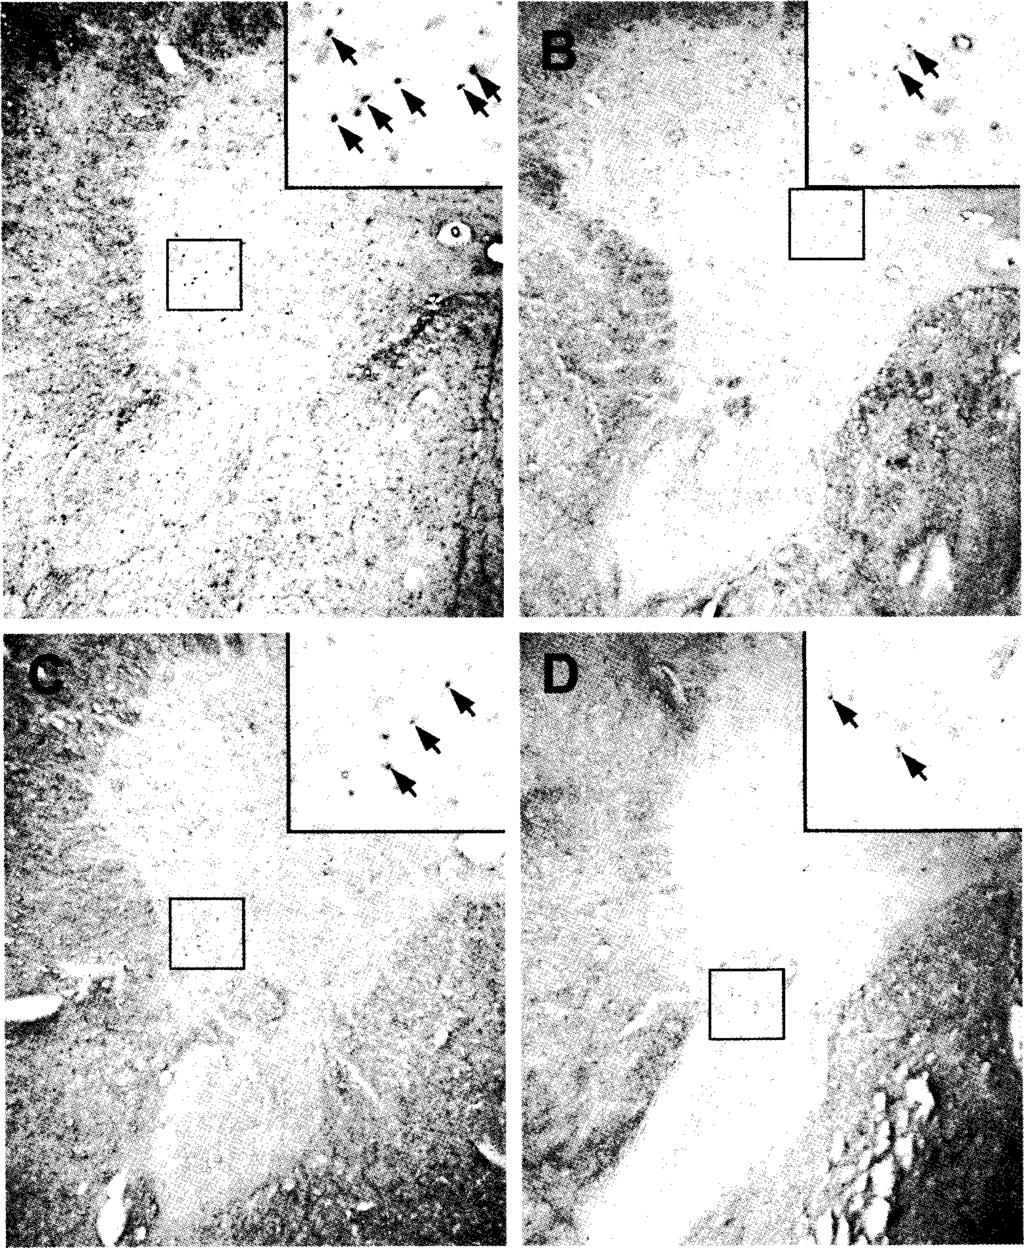 Fig. 2. M icrographs o f B rdu+ cells in the spinal cord at various tim e points after BrdU injection: A - 2 hours, B - 2 w eeks, C - 5 weeks, D - 10 weeks.